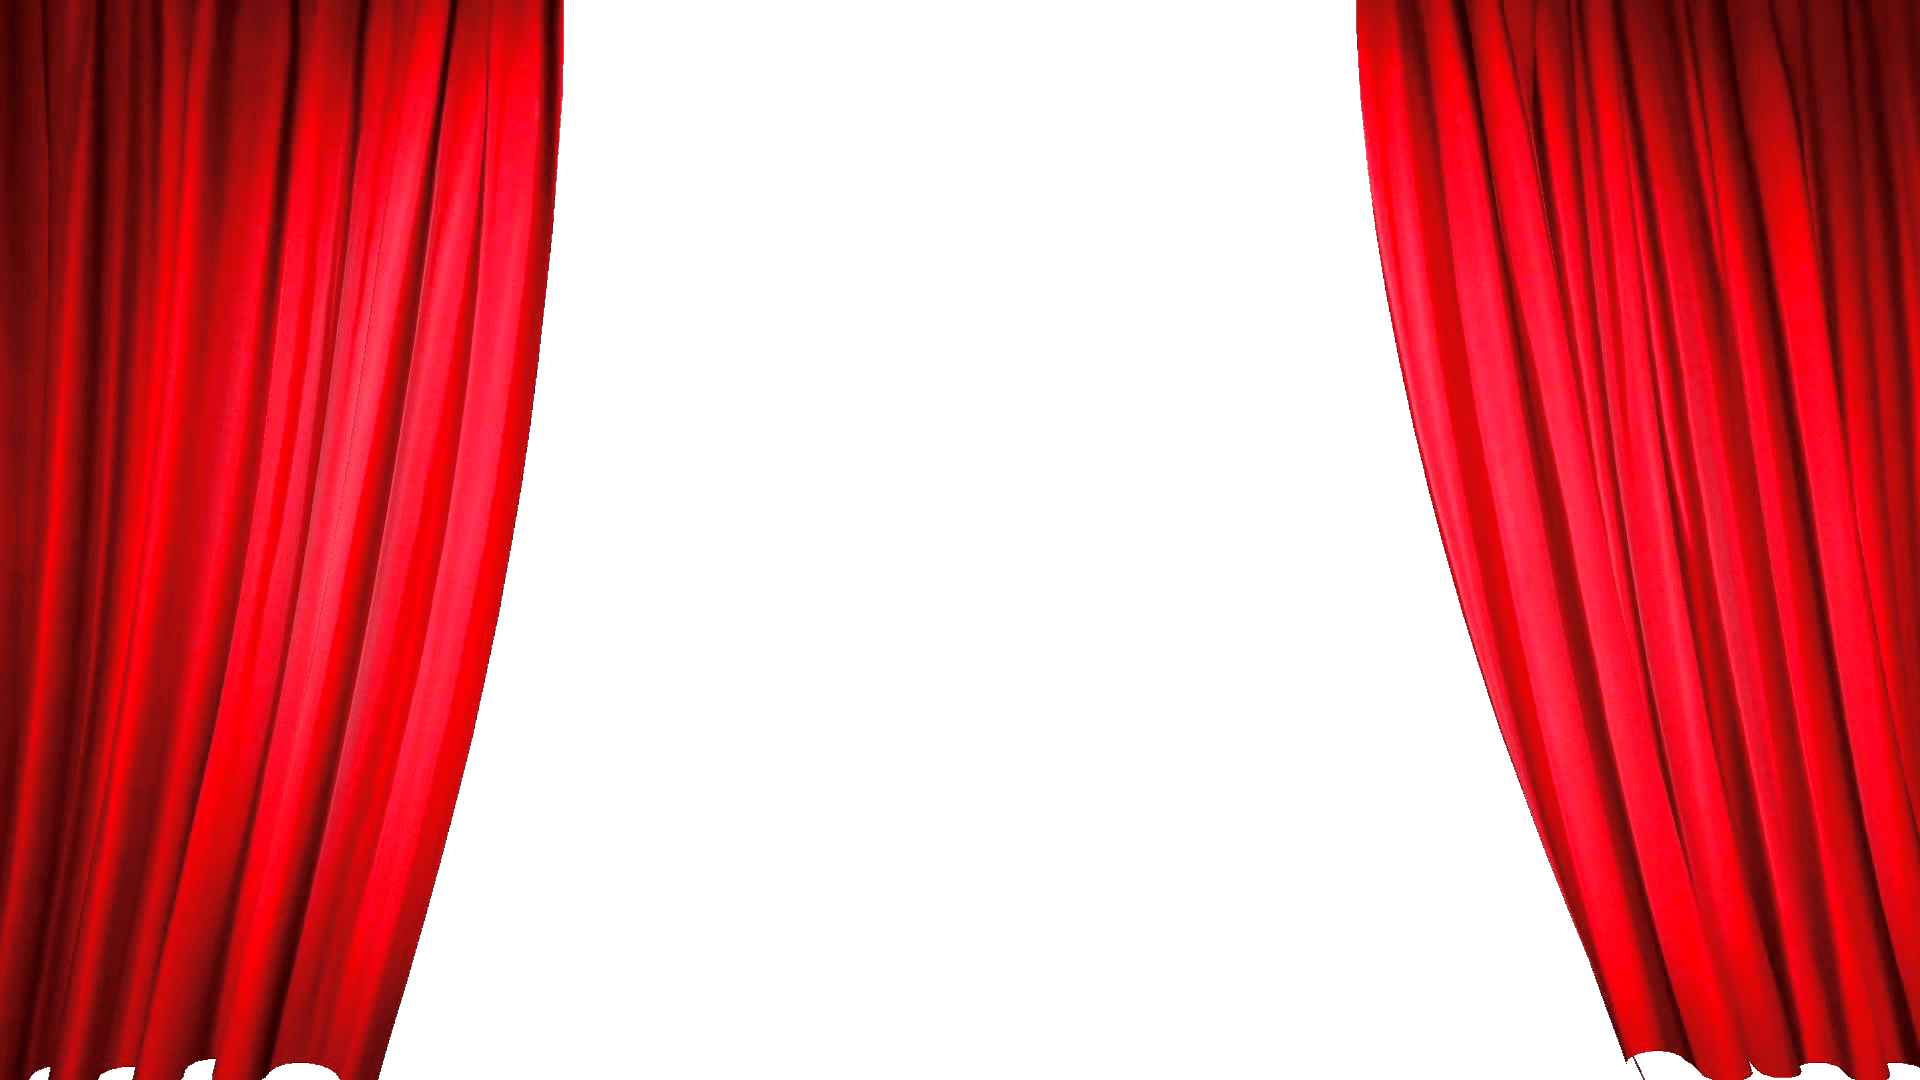 Curtain Png Background - Curtain Png And Psd In 2020 Wallpaper Images ...